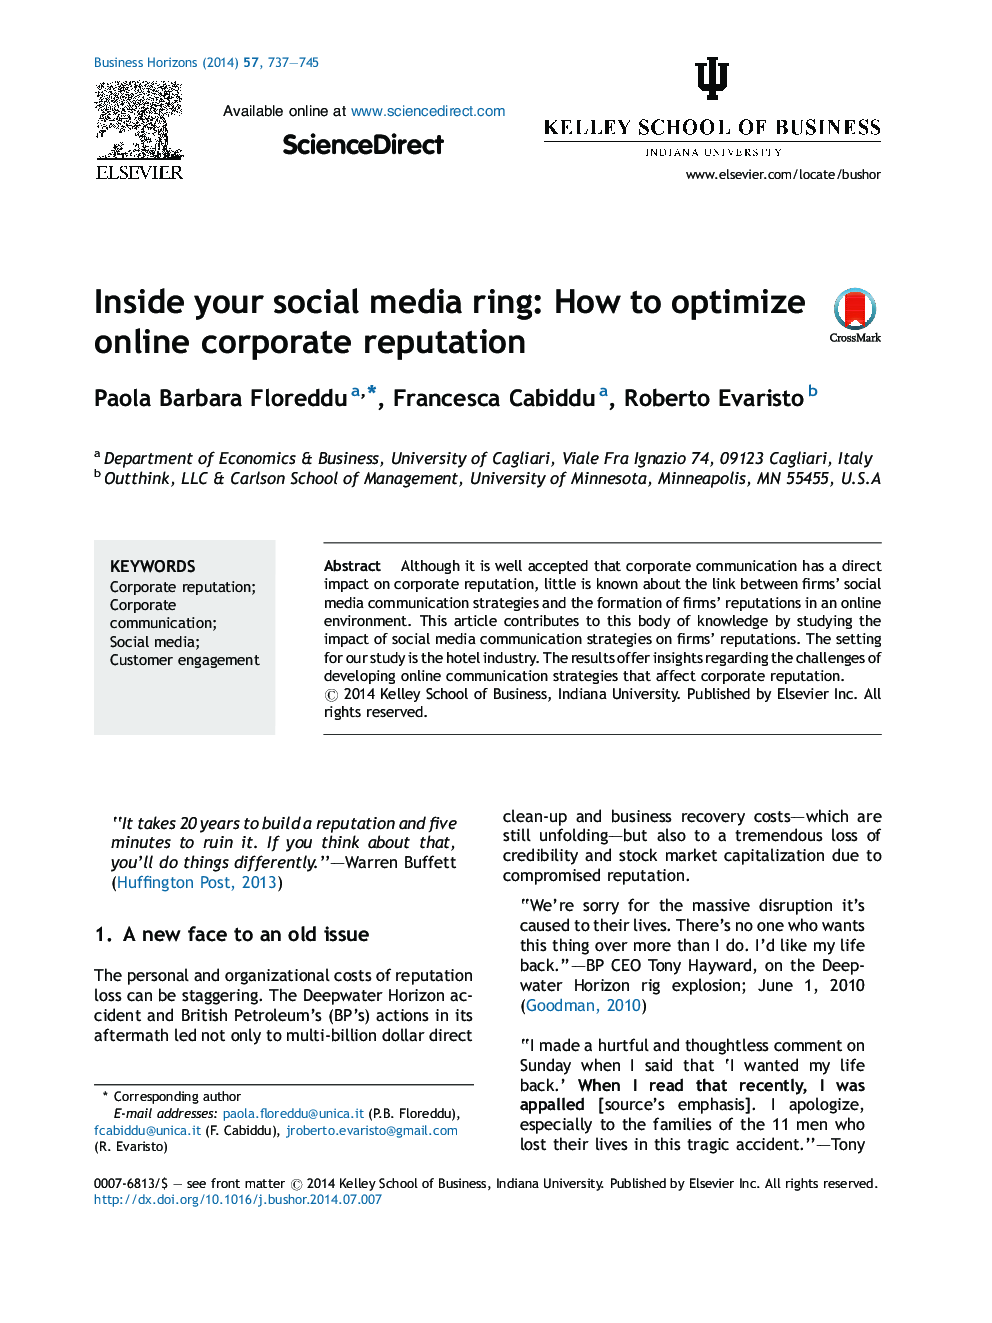 Inside your social media ring: How to optimize online corporate reputation